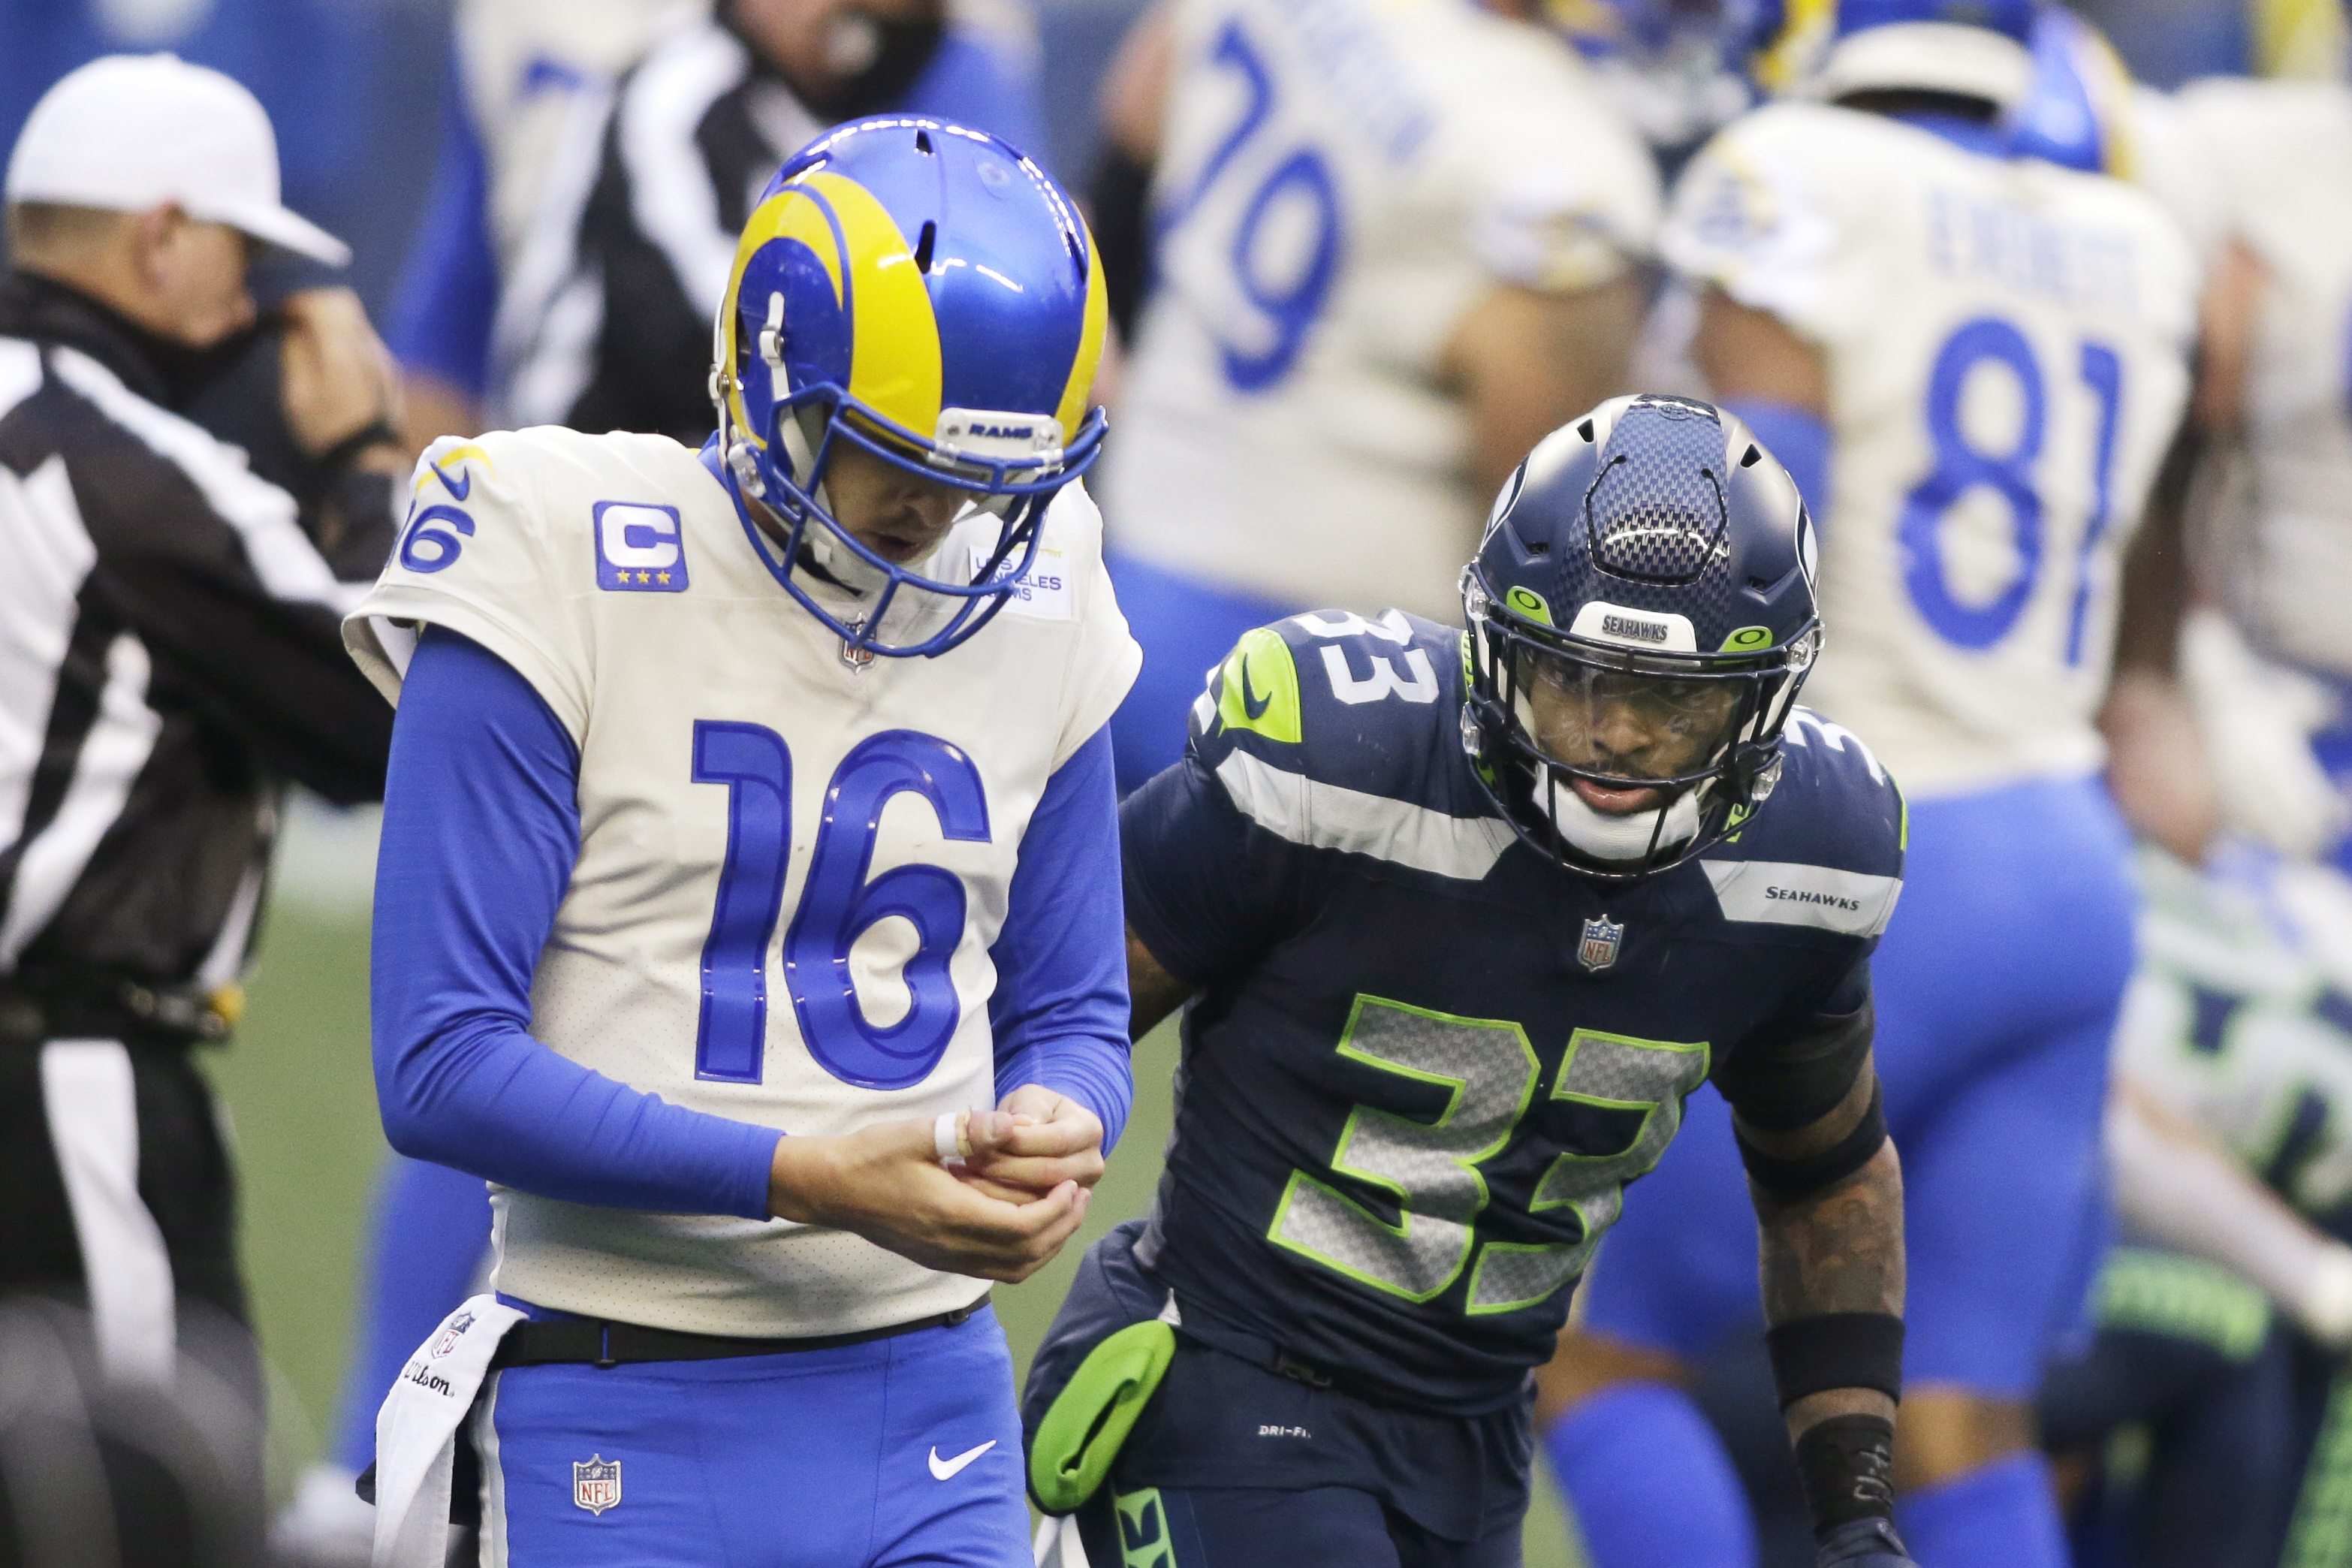 Rams beat Seahawks 30-20 in NFC wild-card playoff game